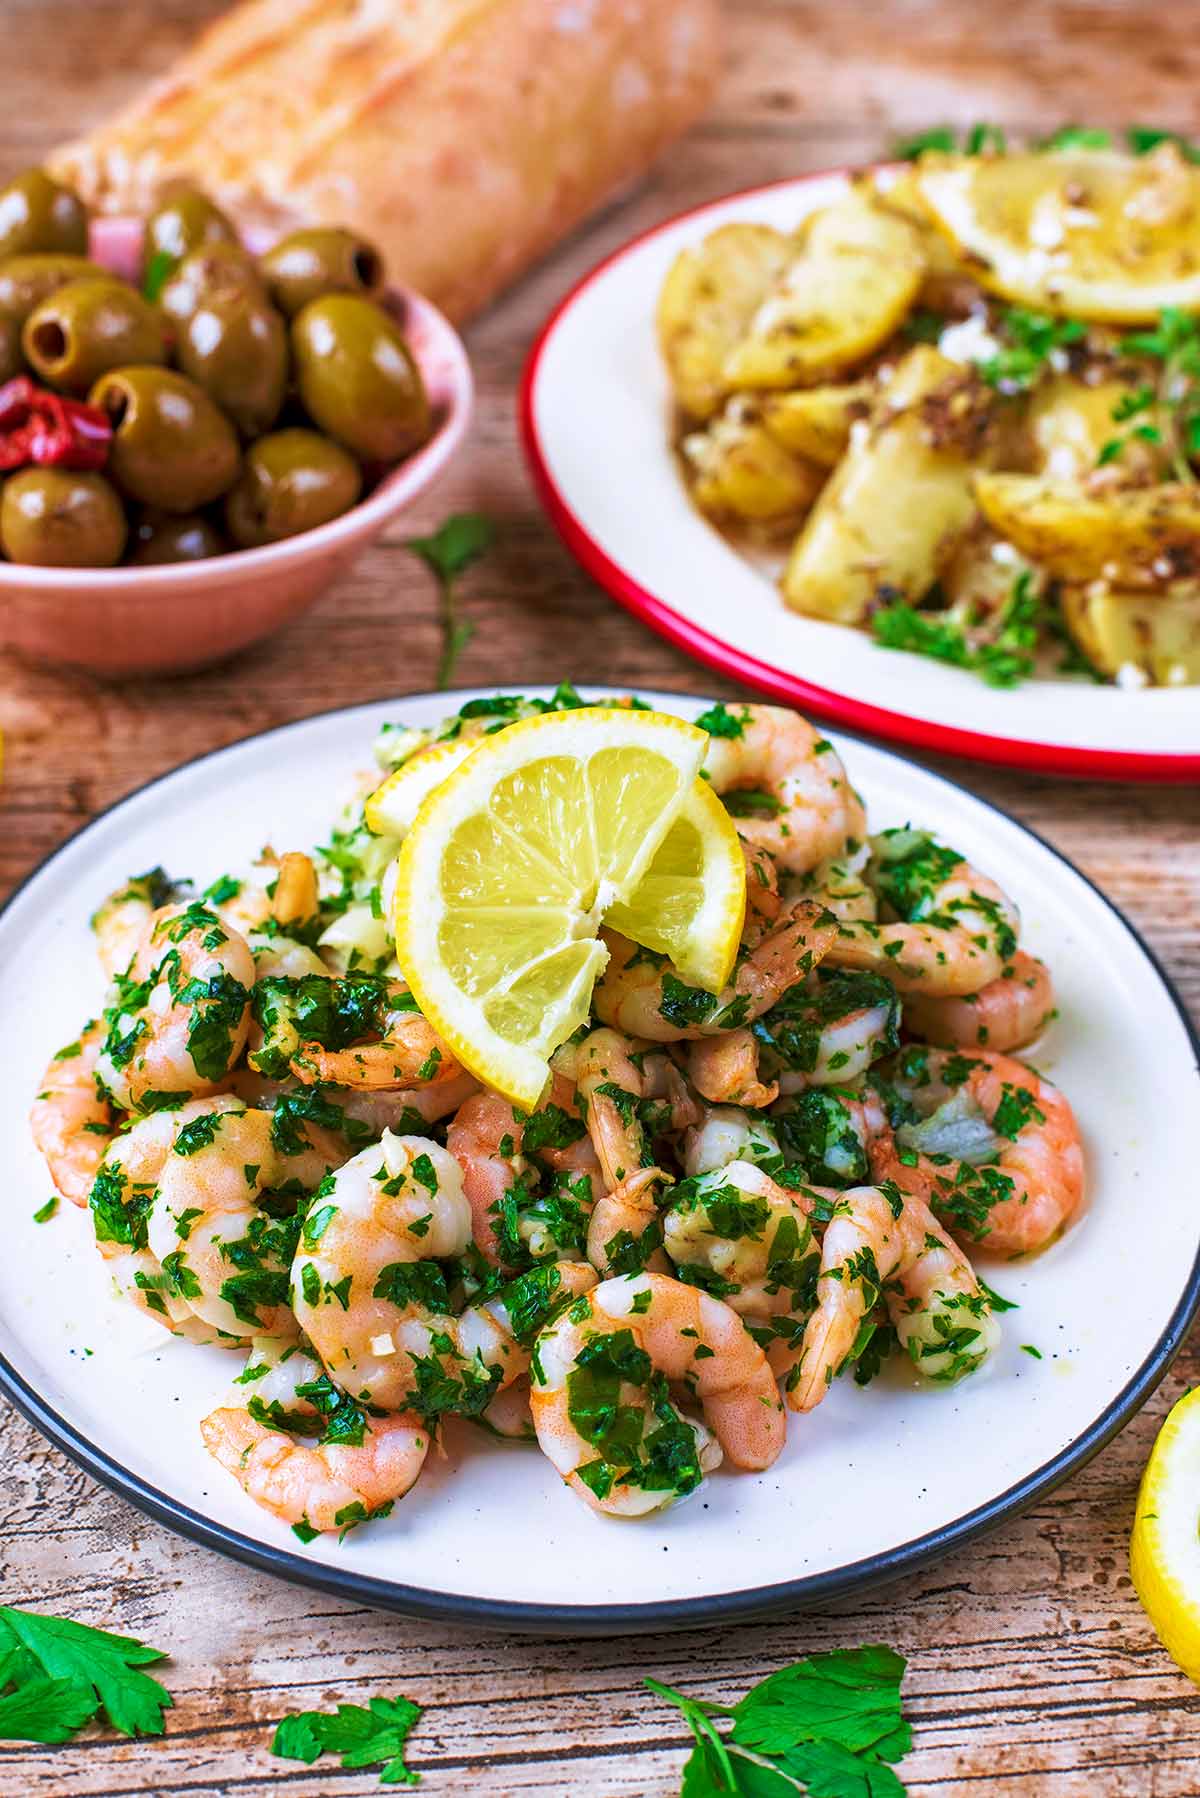 Cooked King Prawns on a white plate. olives and potatoes are in the background.